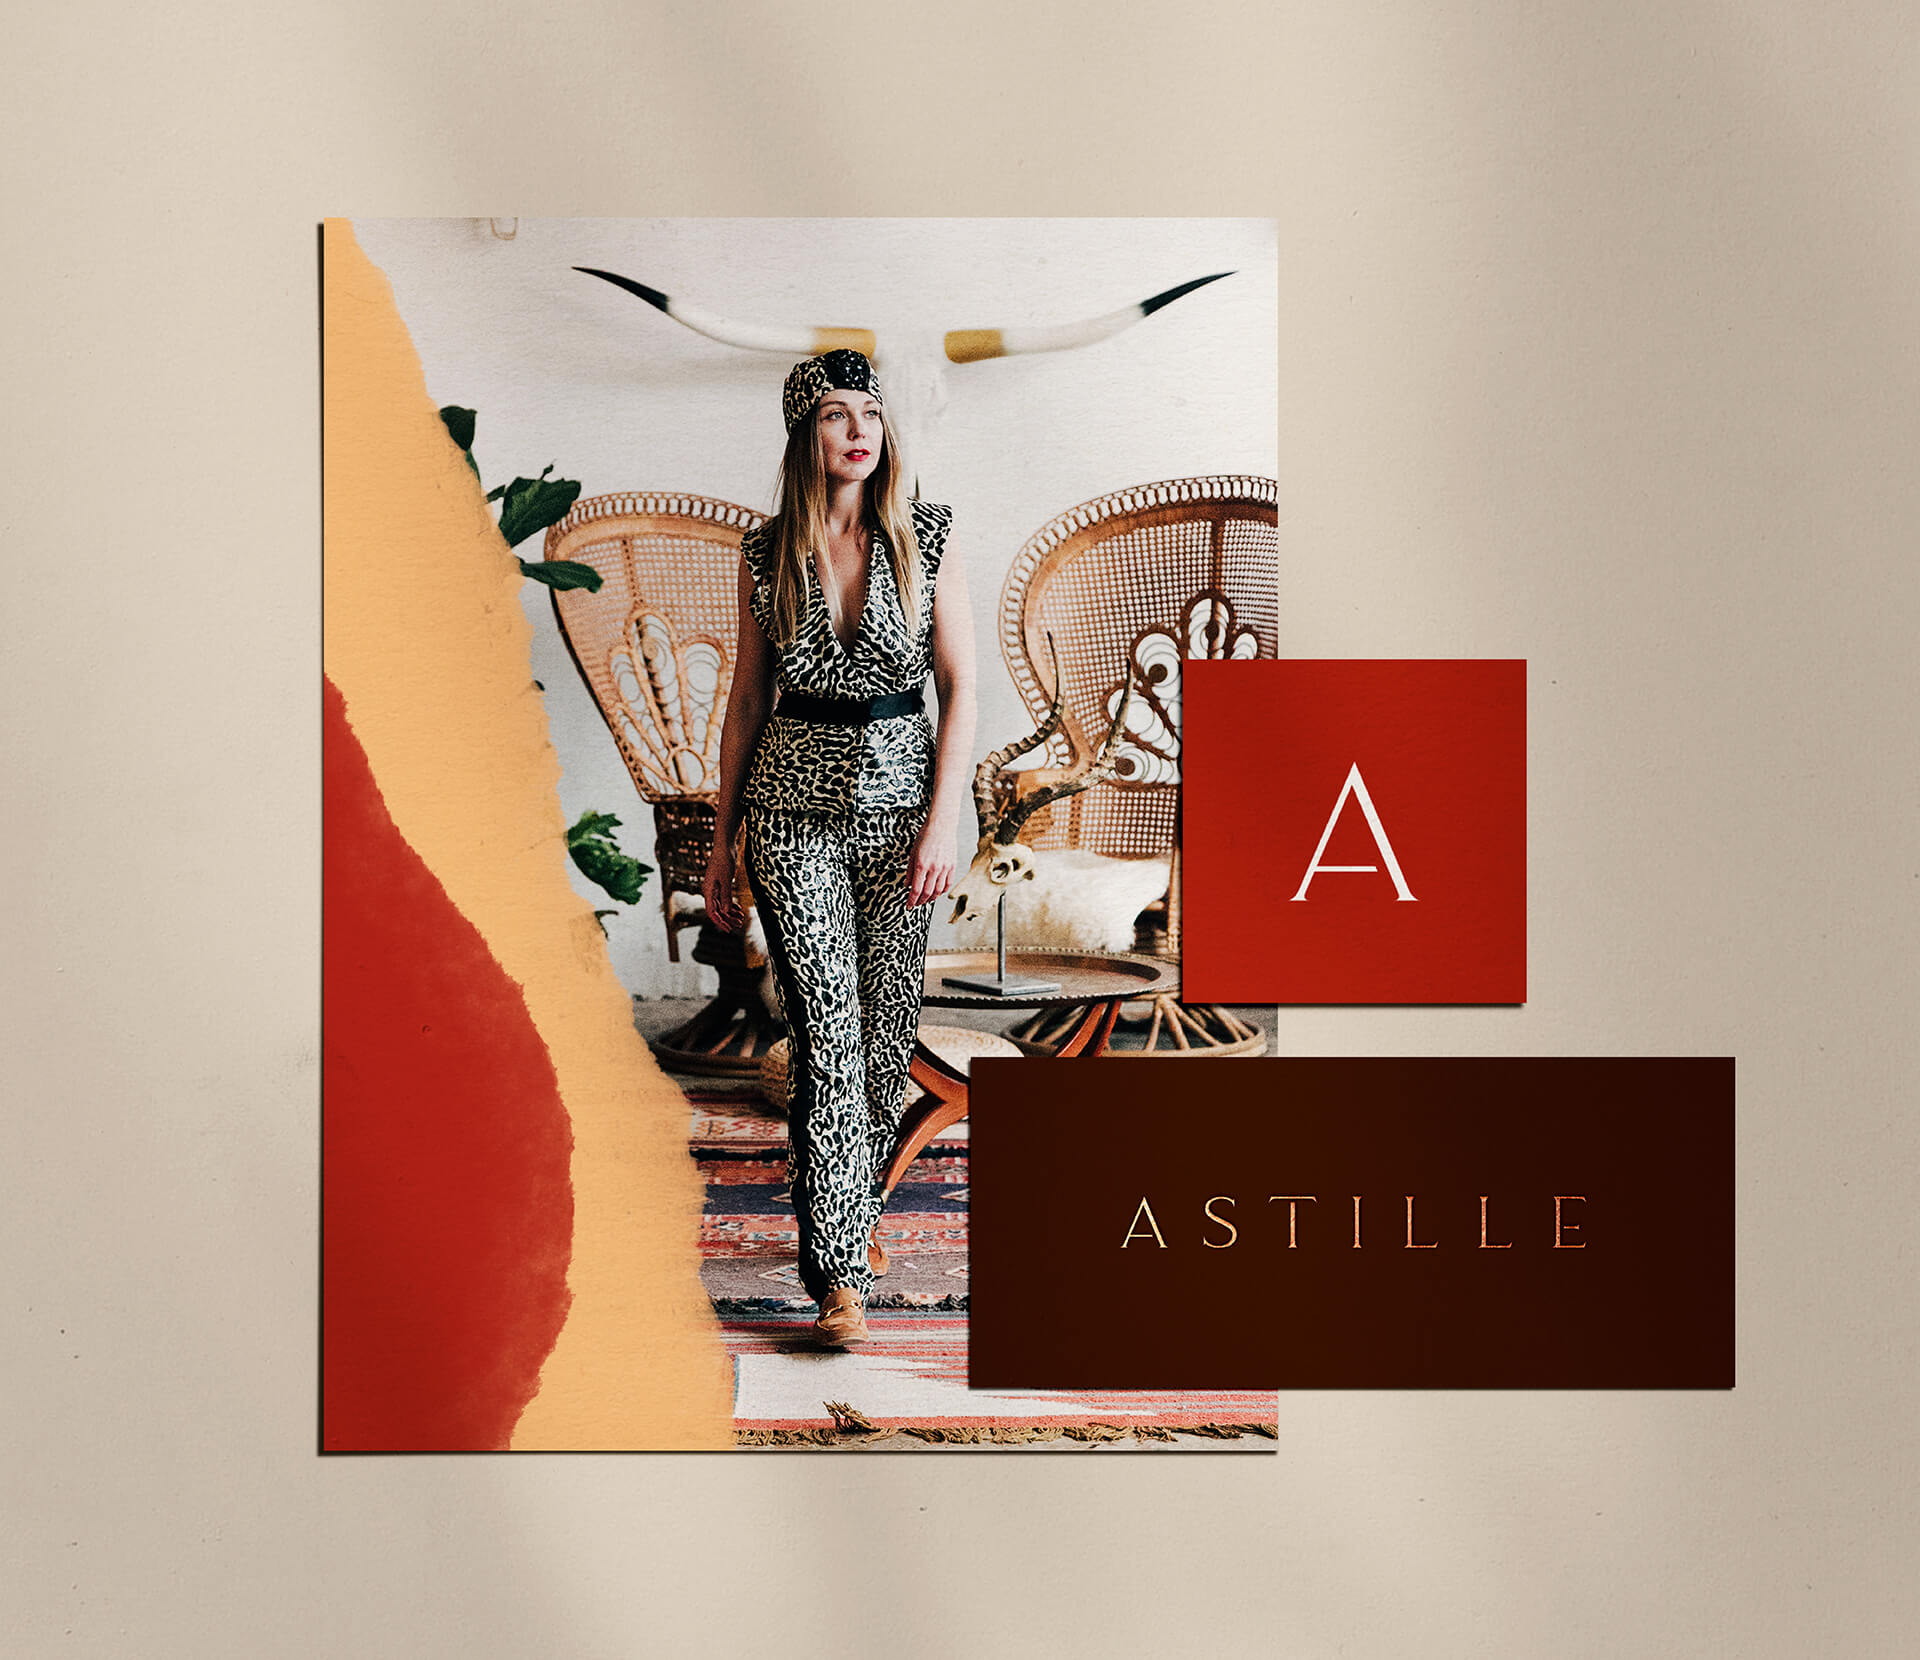 Overview of Astille brand identity logo suite